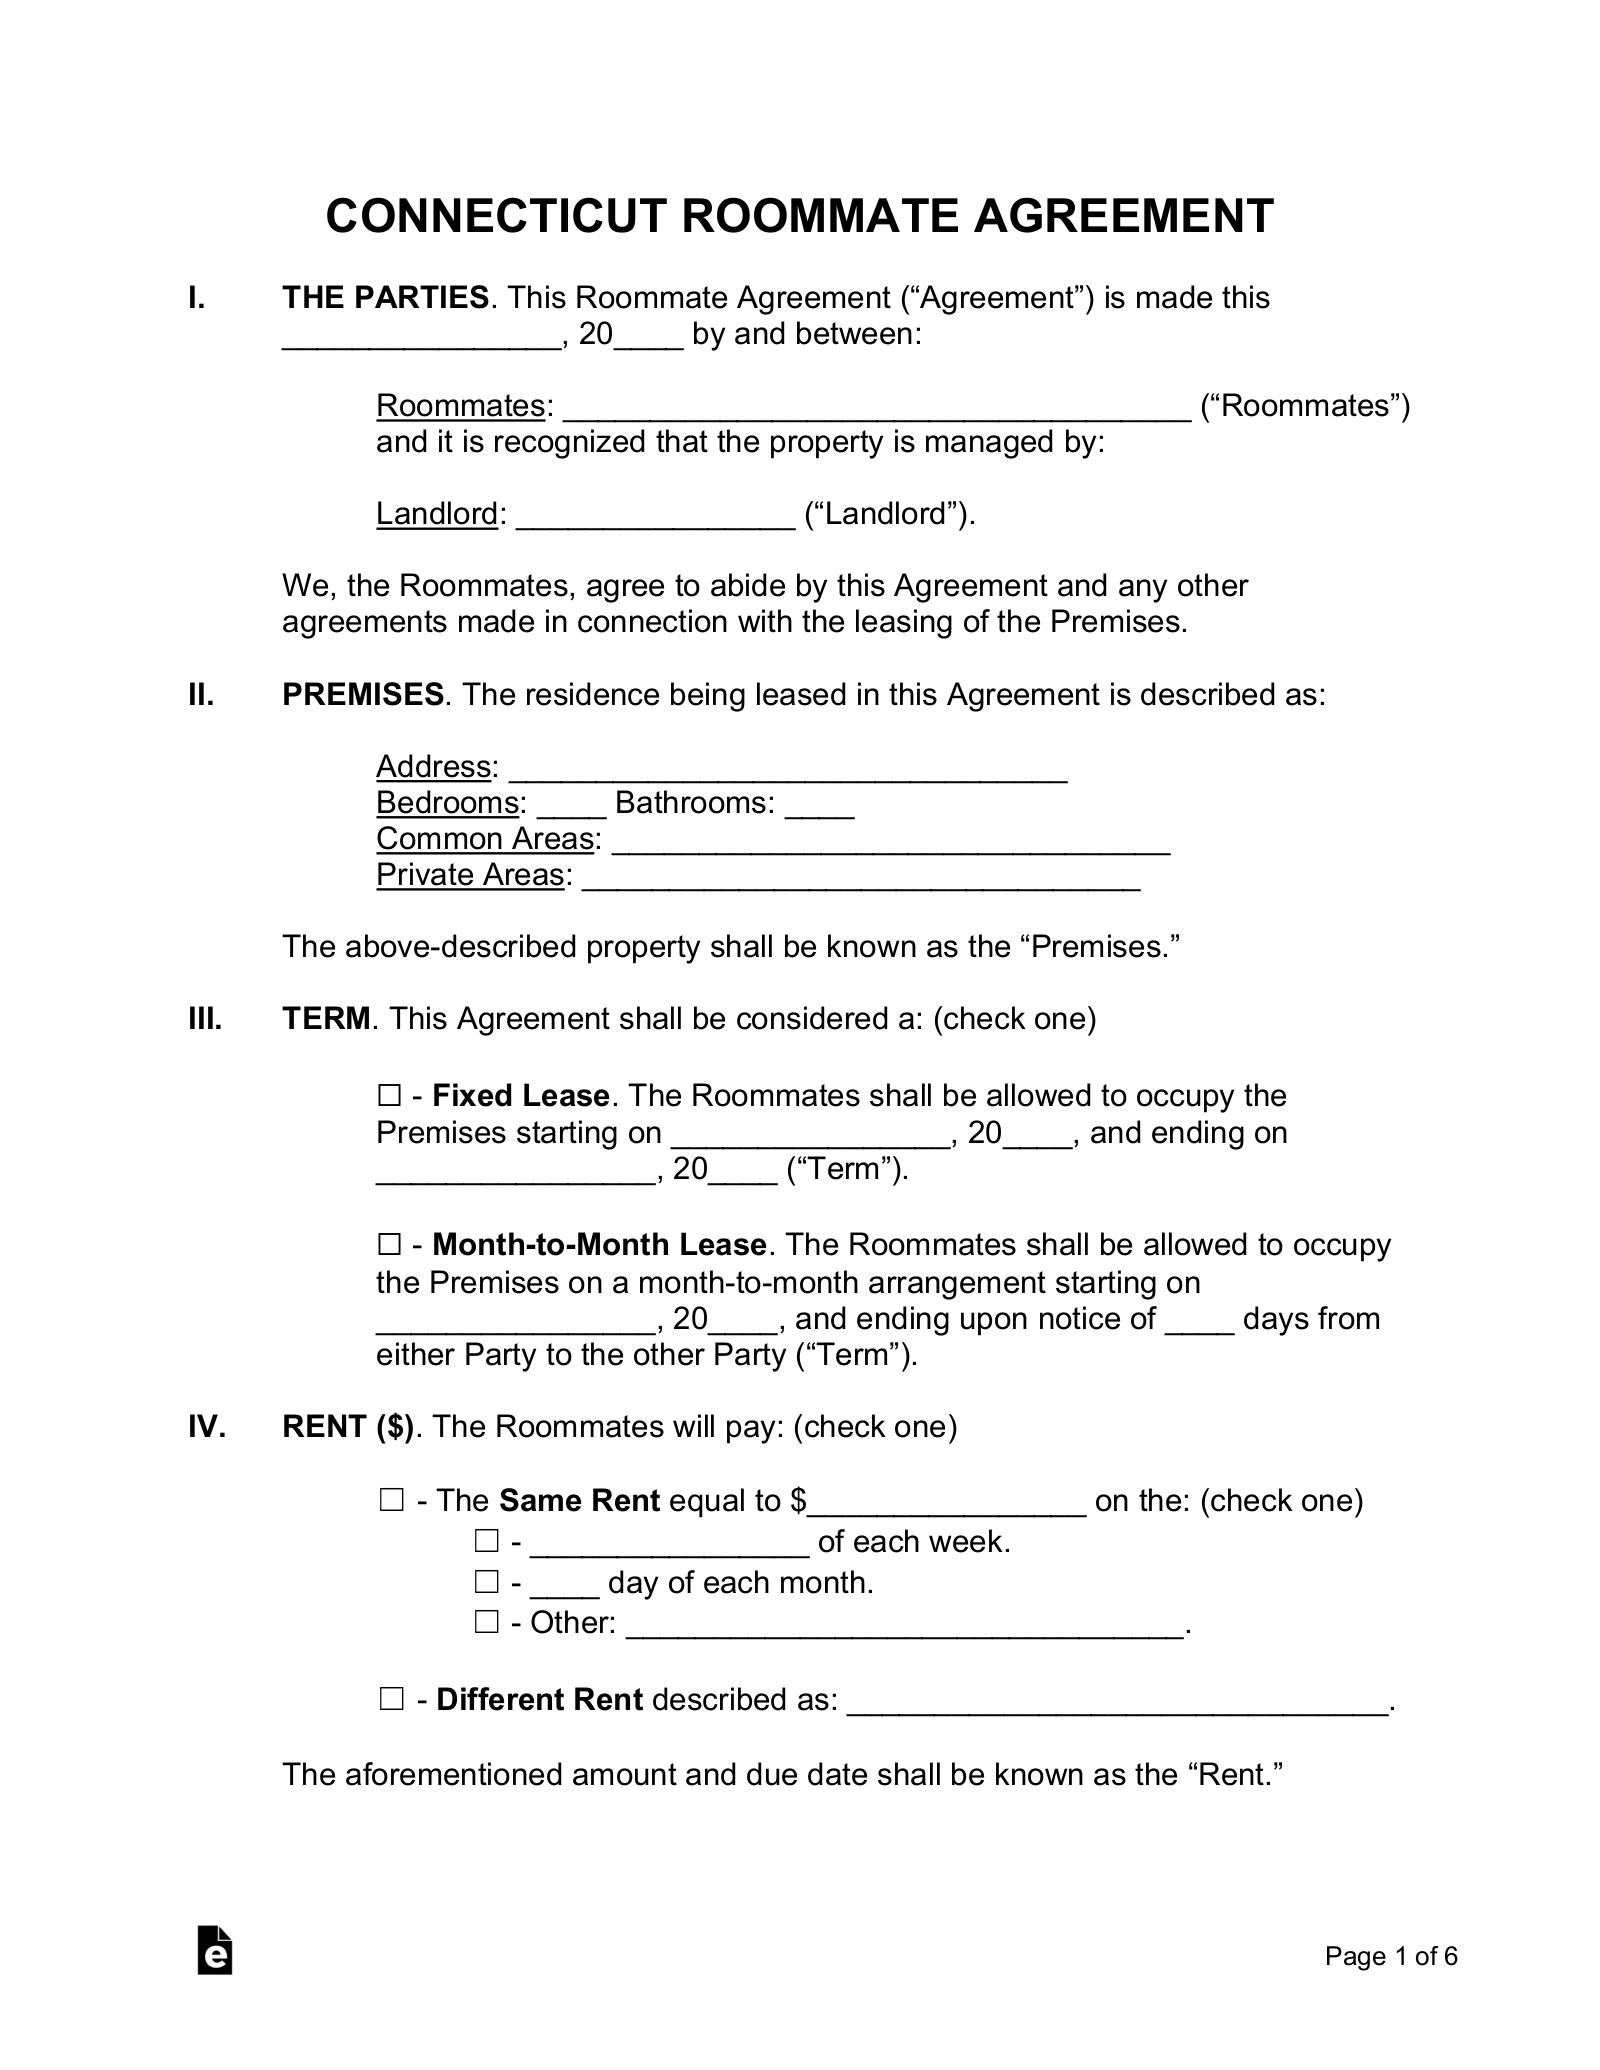 free connecticut roommate room rental agreement form